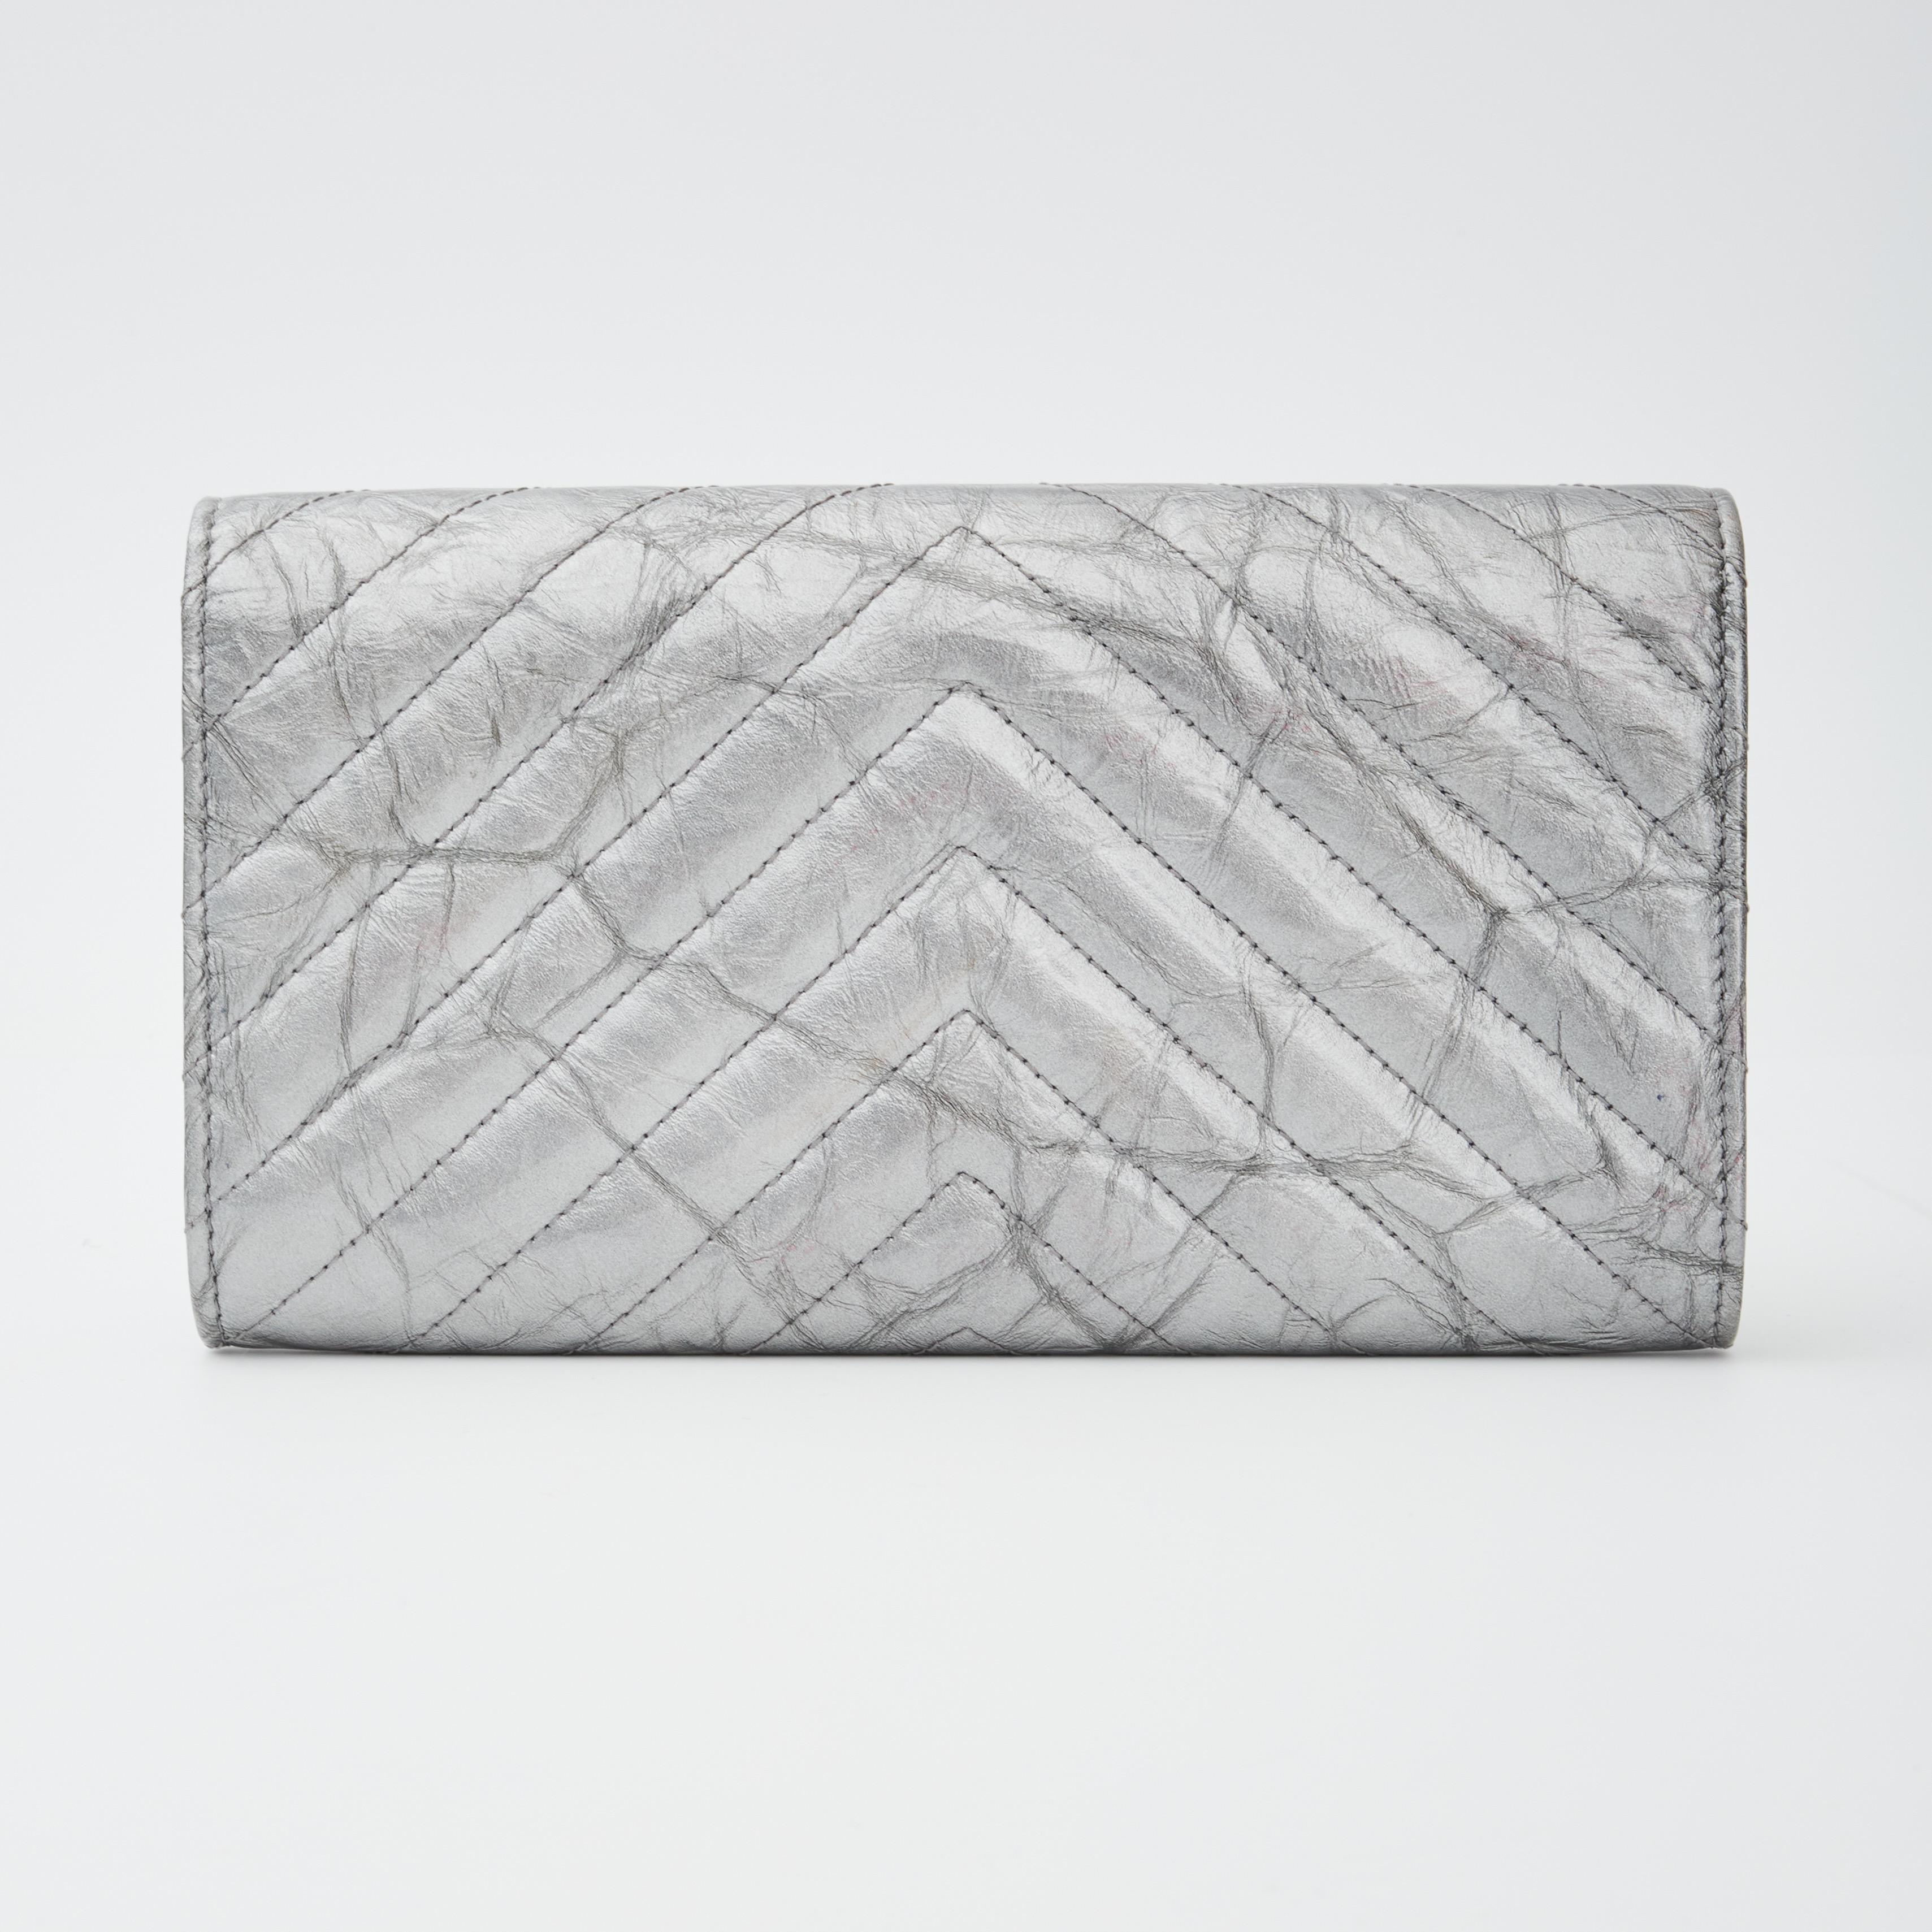 This wallet is constructed of a chevron quilted patent leather and features a small silver tone CC logo, a front flap, snap closure and a patronized interior. The interior has many card slots and a cash and coin compartment.

Chanel reference